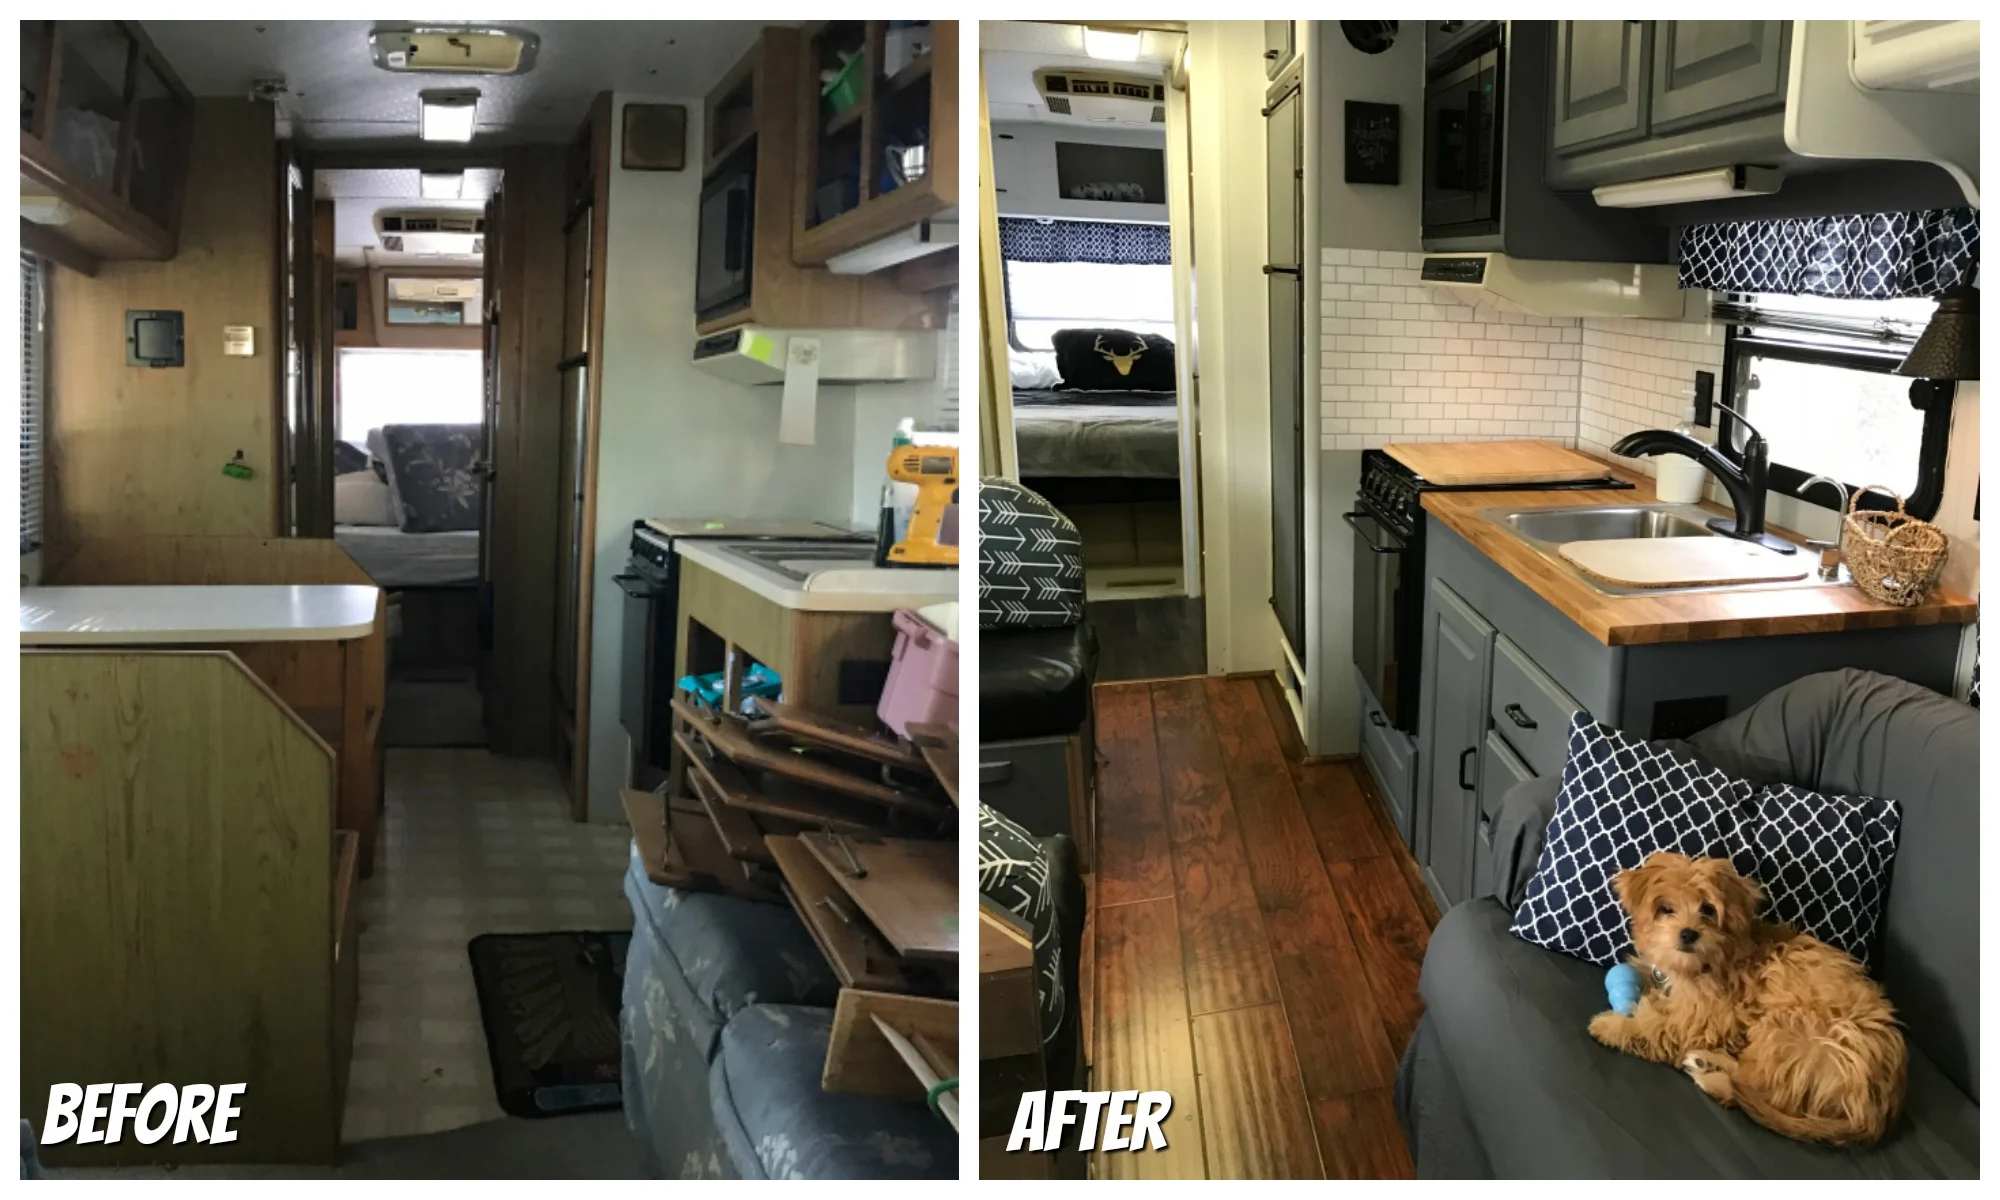 RVObsession.com - RV Renovations | Motorhome Renovations - Whether it's a quick spruce up or a major remodel, an RV renovation can breathe new life into an old motorhome. The New Lighter Life